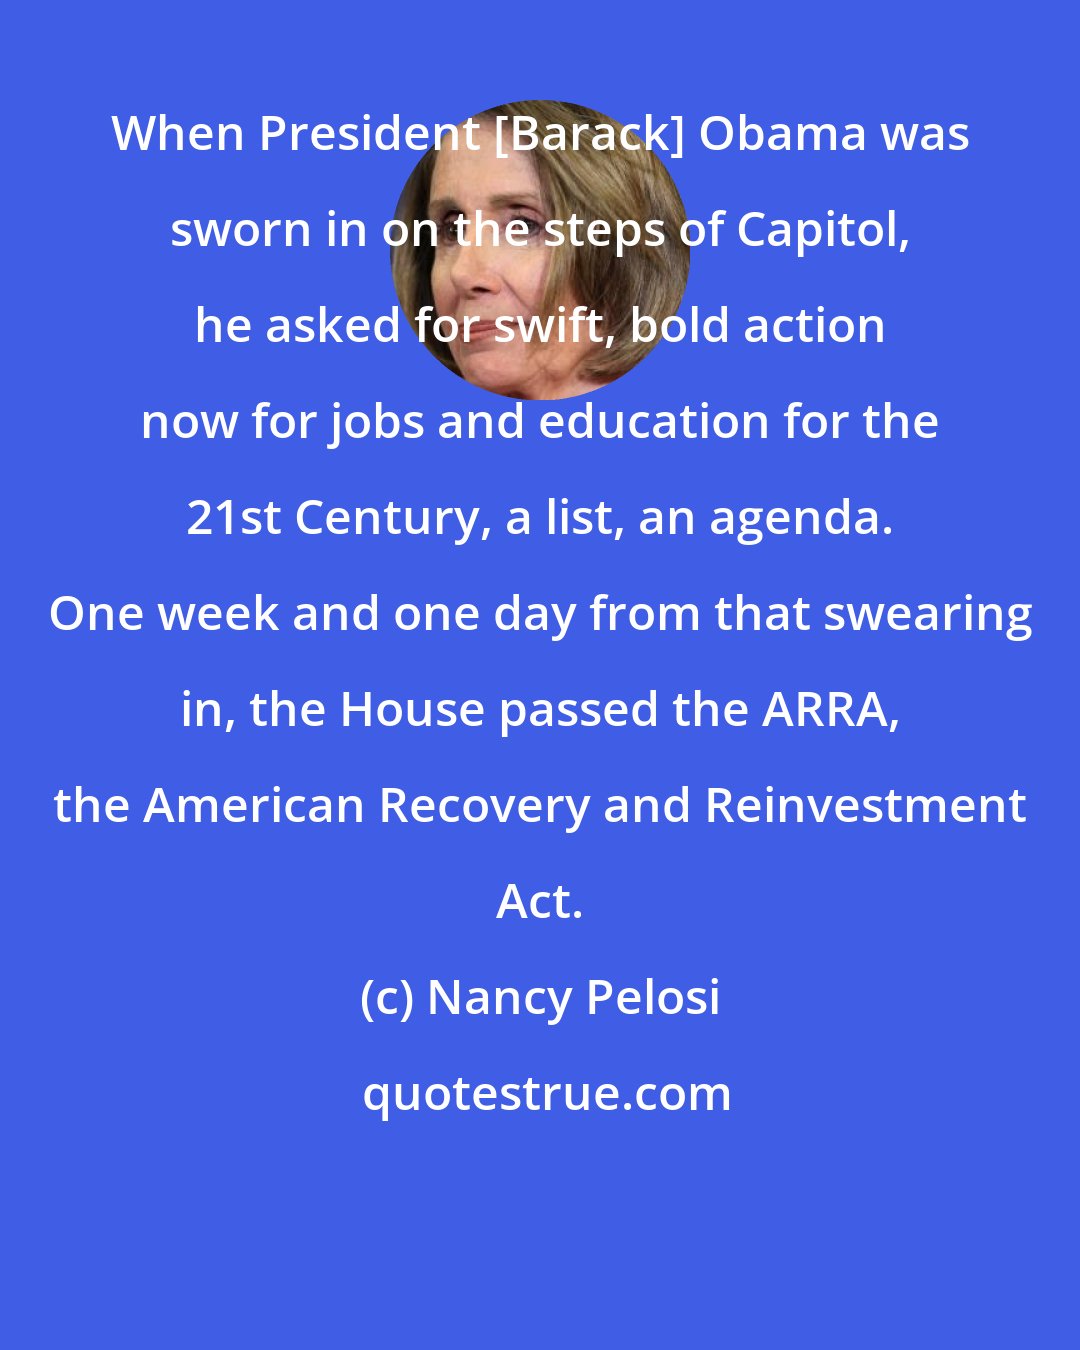 Nancy Pelosi: When President [Barack] Obama was sworn in on the steps of Capitol, he asked for swift, bold action now for jobs and education for the 21st Century, a list, an agenda. One week and one day from that swearing in, the House passed the ARRA, the American Recovery and Reinvestment Act.